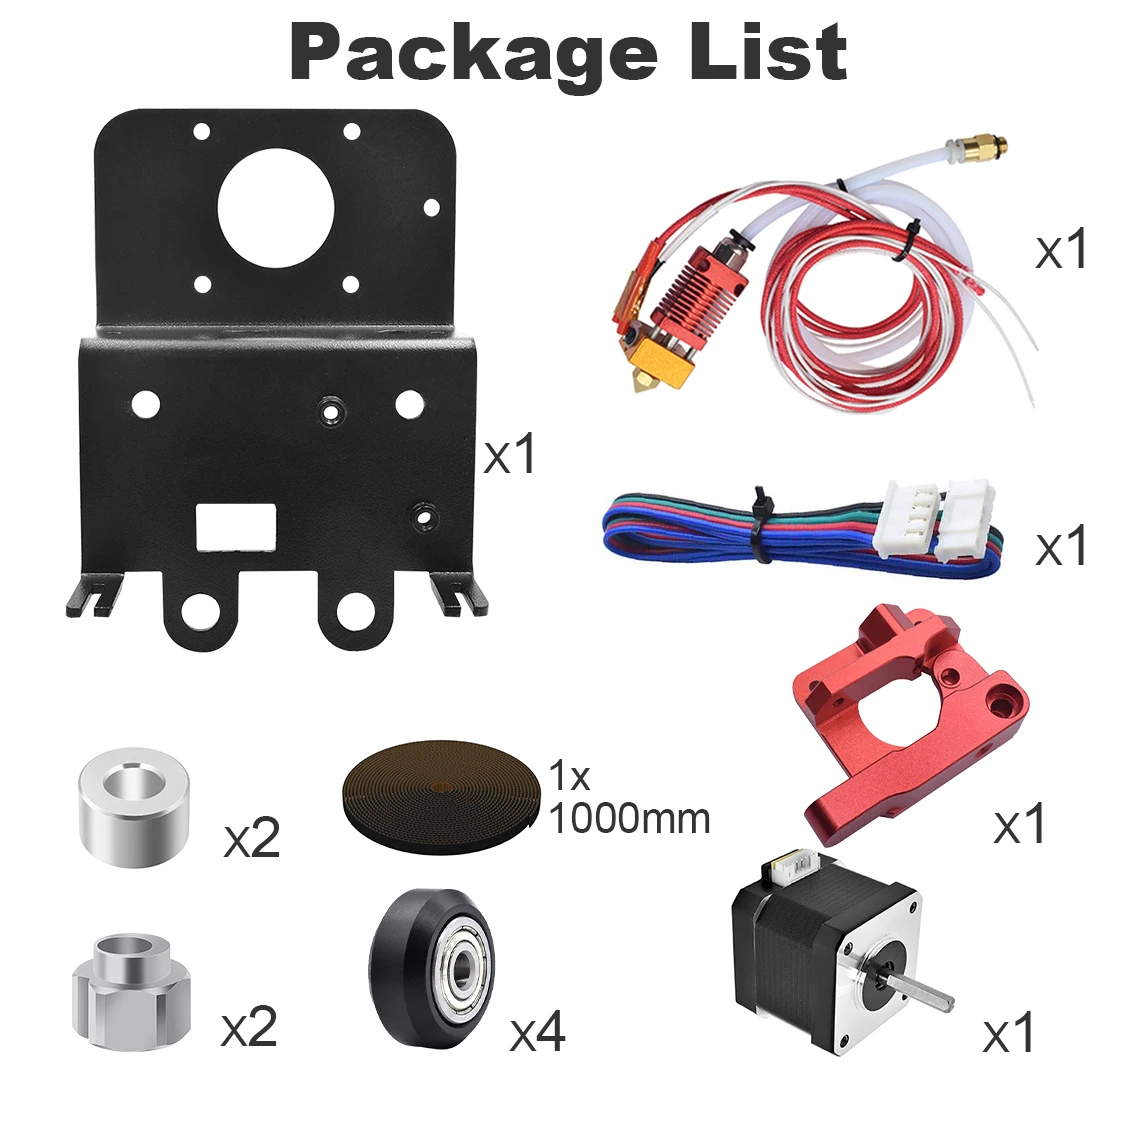 Extruder Support Plate+Motor+Heating Kit pulley Metal Extruder Right Hand Block Kit Drive Feeder 3D Printer Parts extruder feeder big gear 66 tooth stainless steel gear replacement